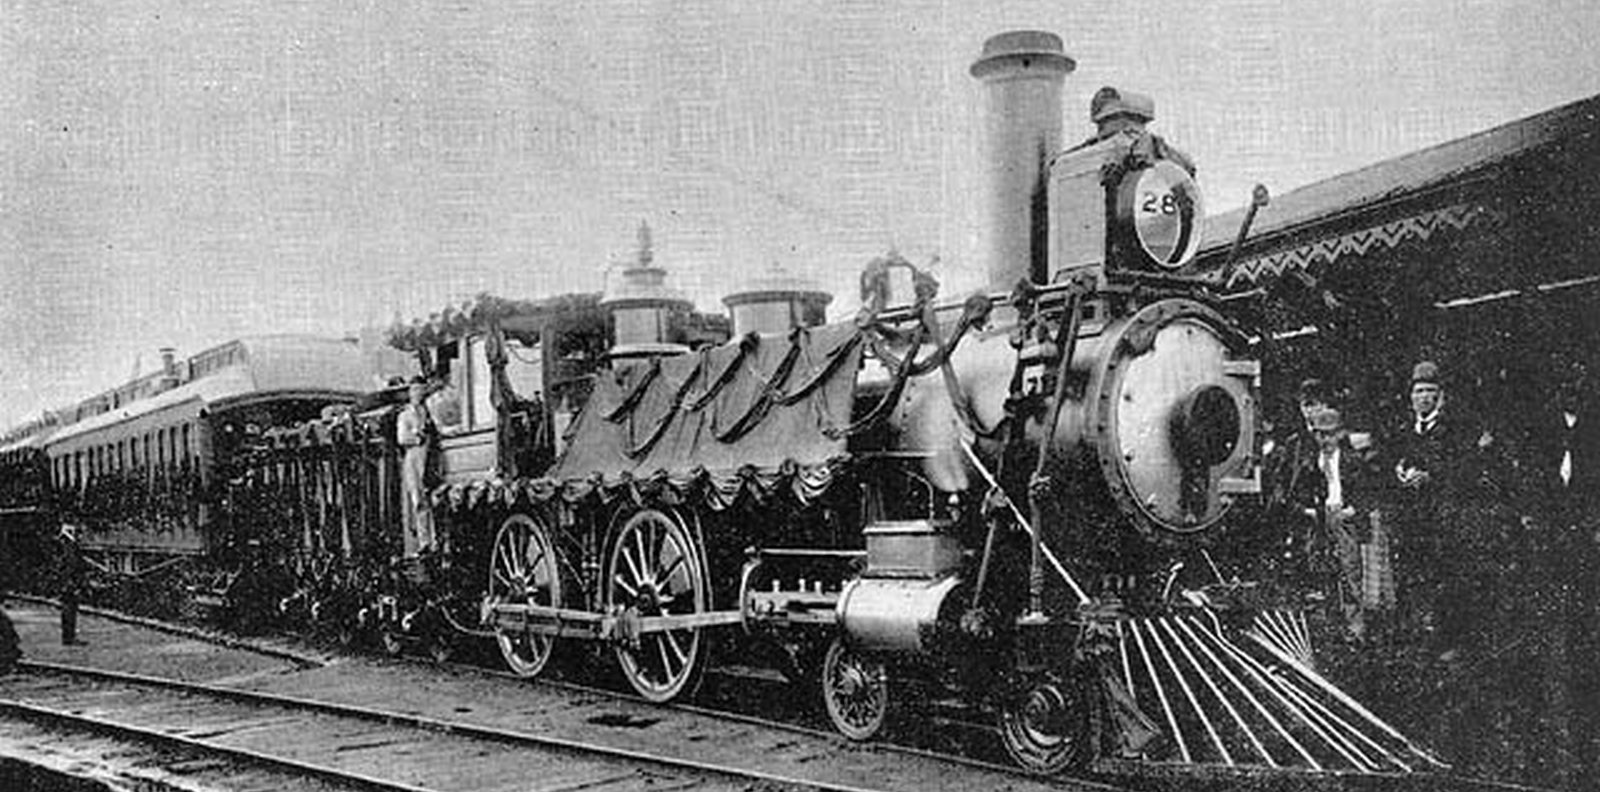 No. 283 decorated for the funeral train of Prime Minister Sir John A. Macdonald